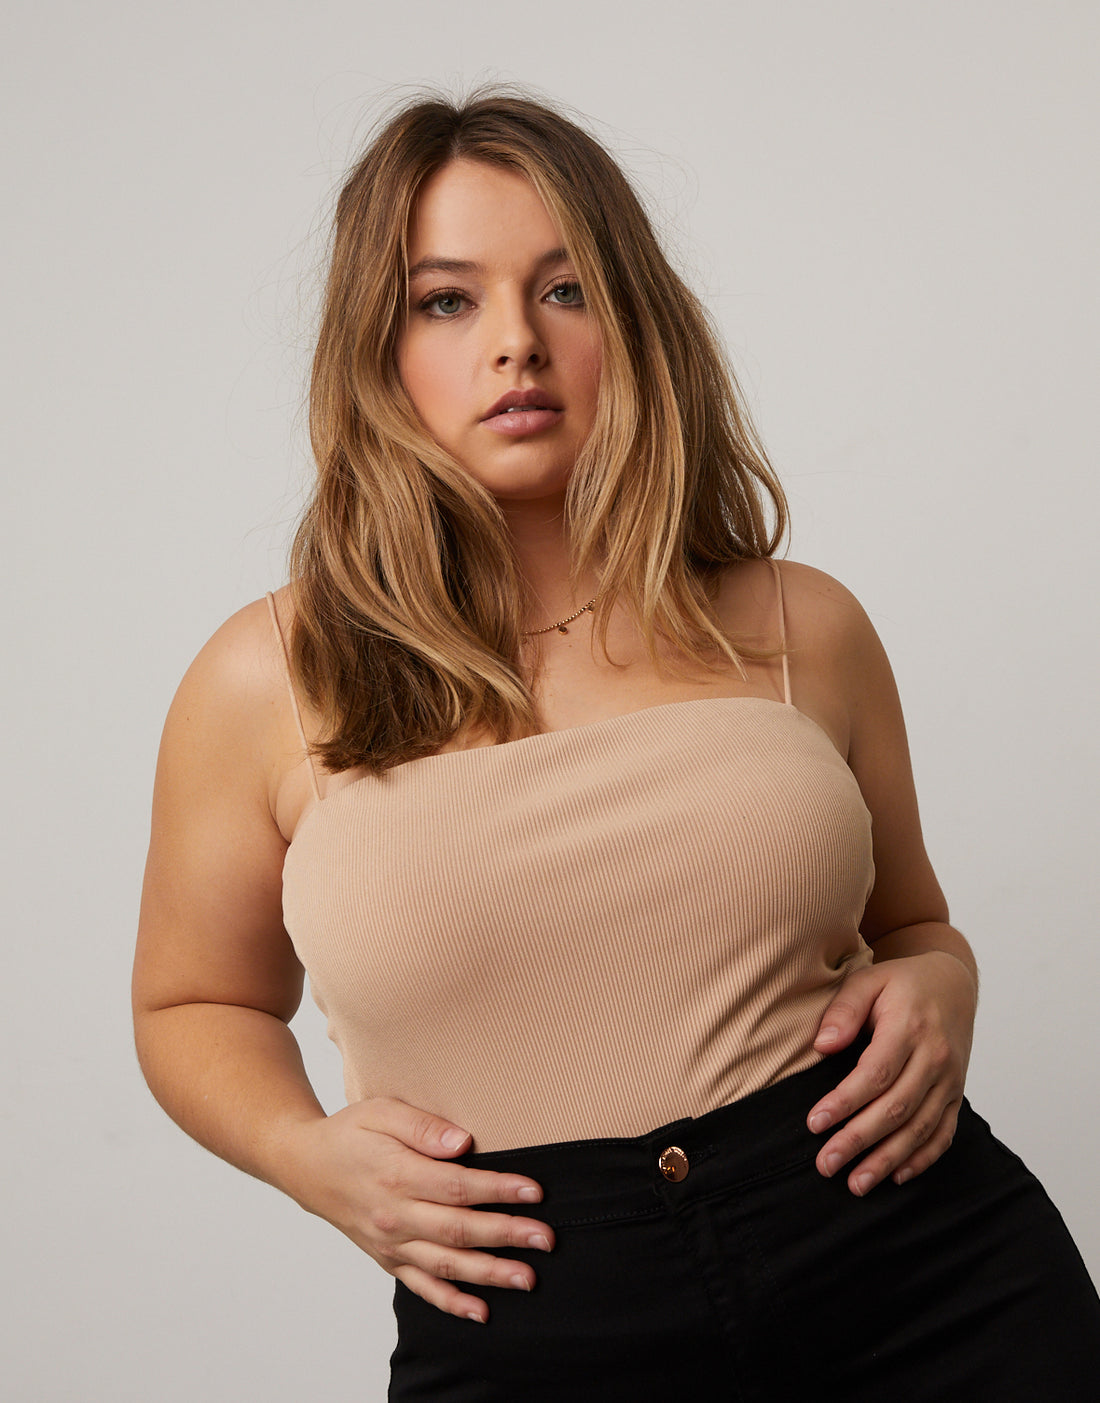 Curve Cropped Tank Top Plus Size Tops -2020AVE